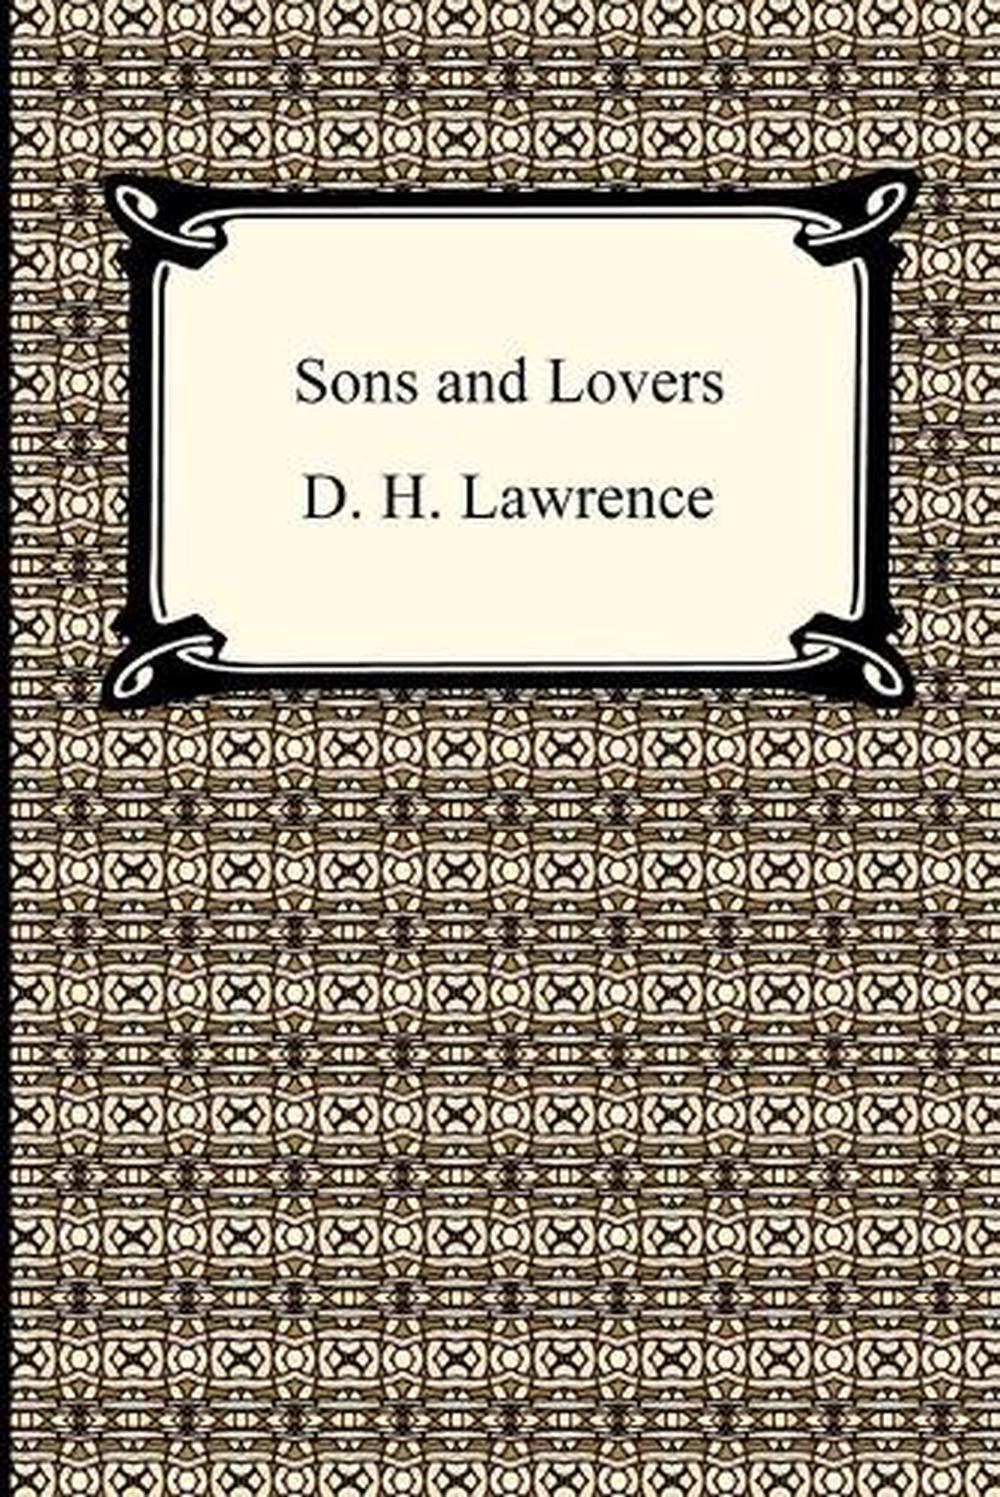 and lovers dh lawrence